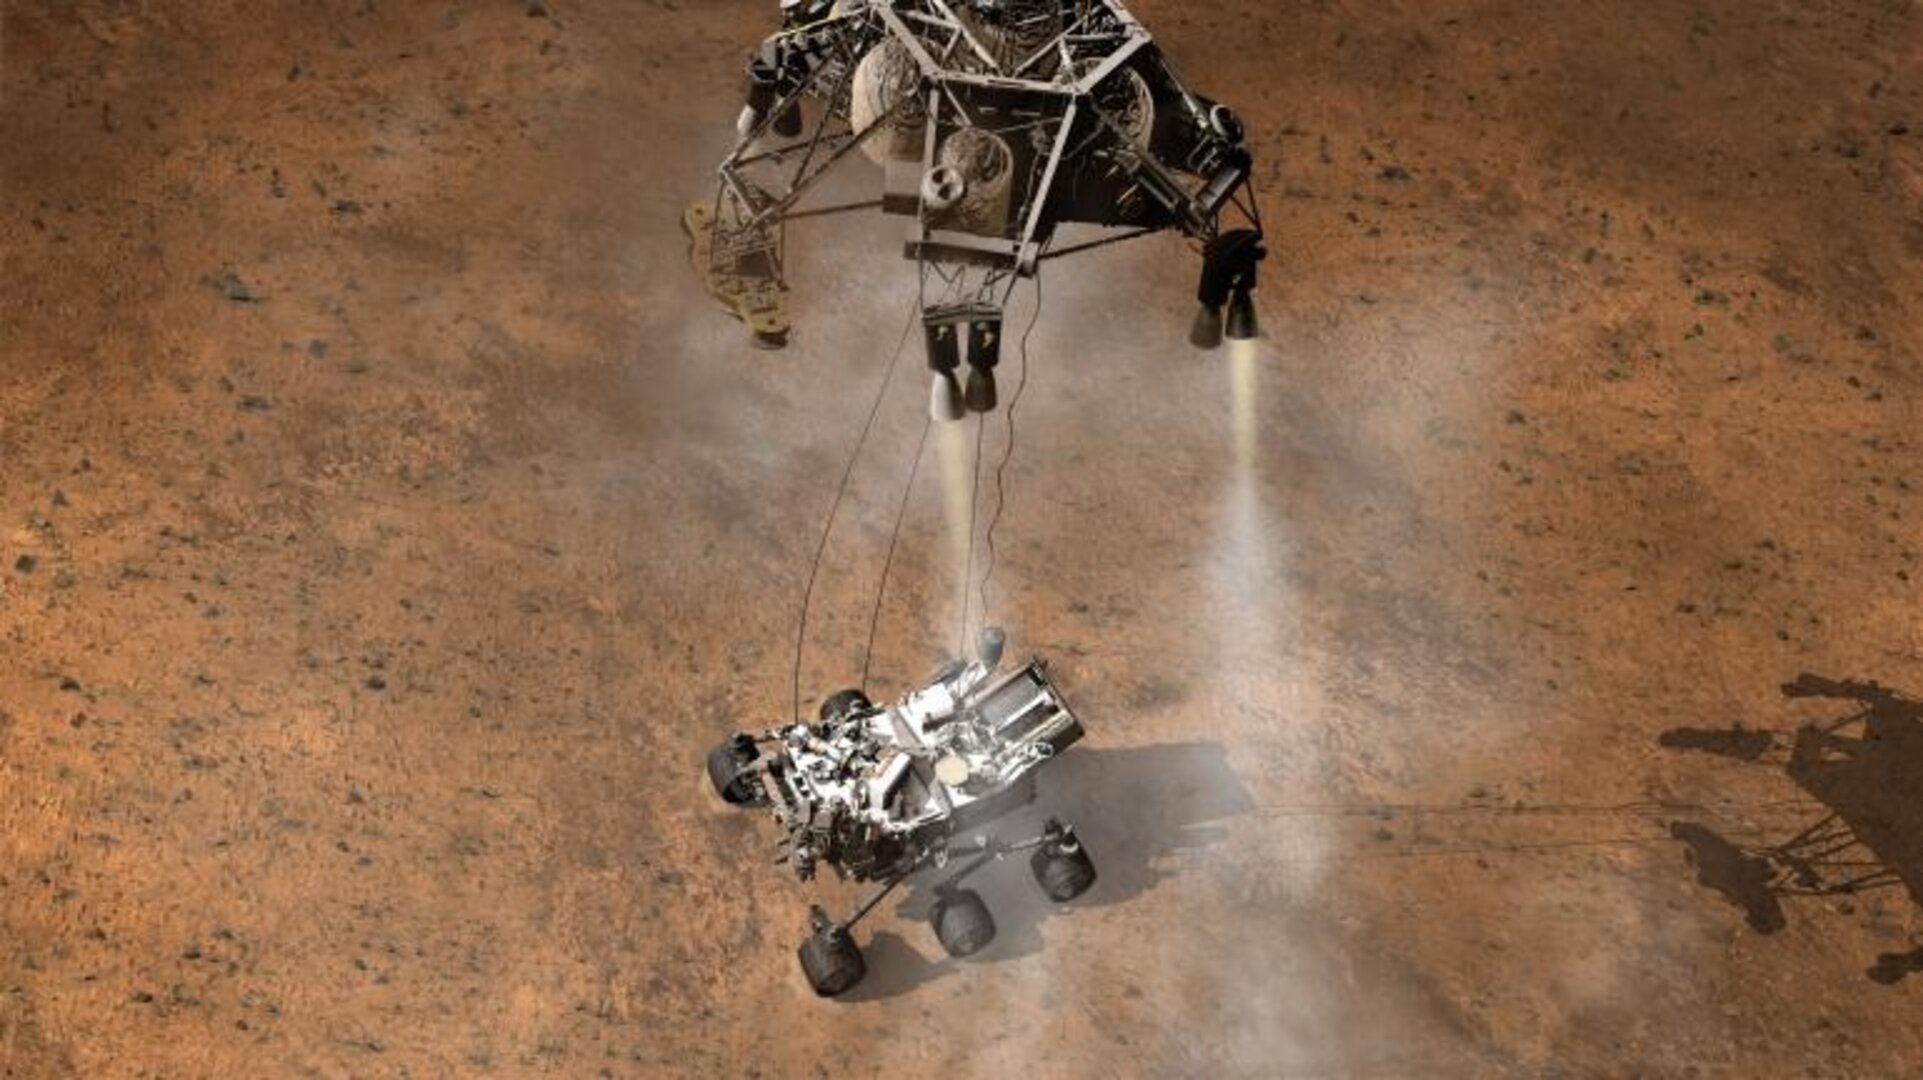 Touchdown of the Curiosity rover